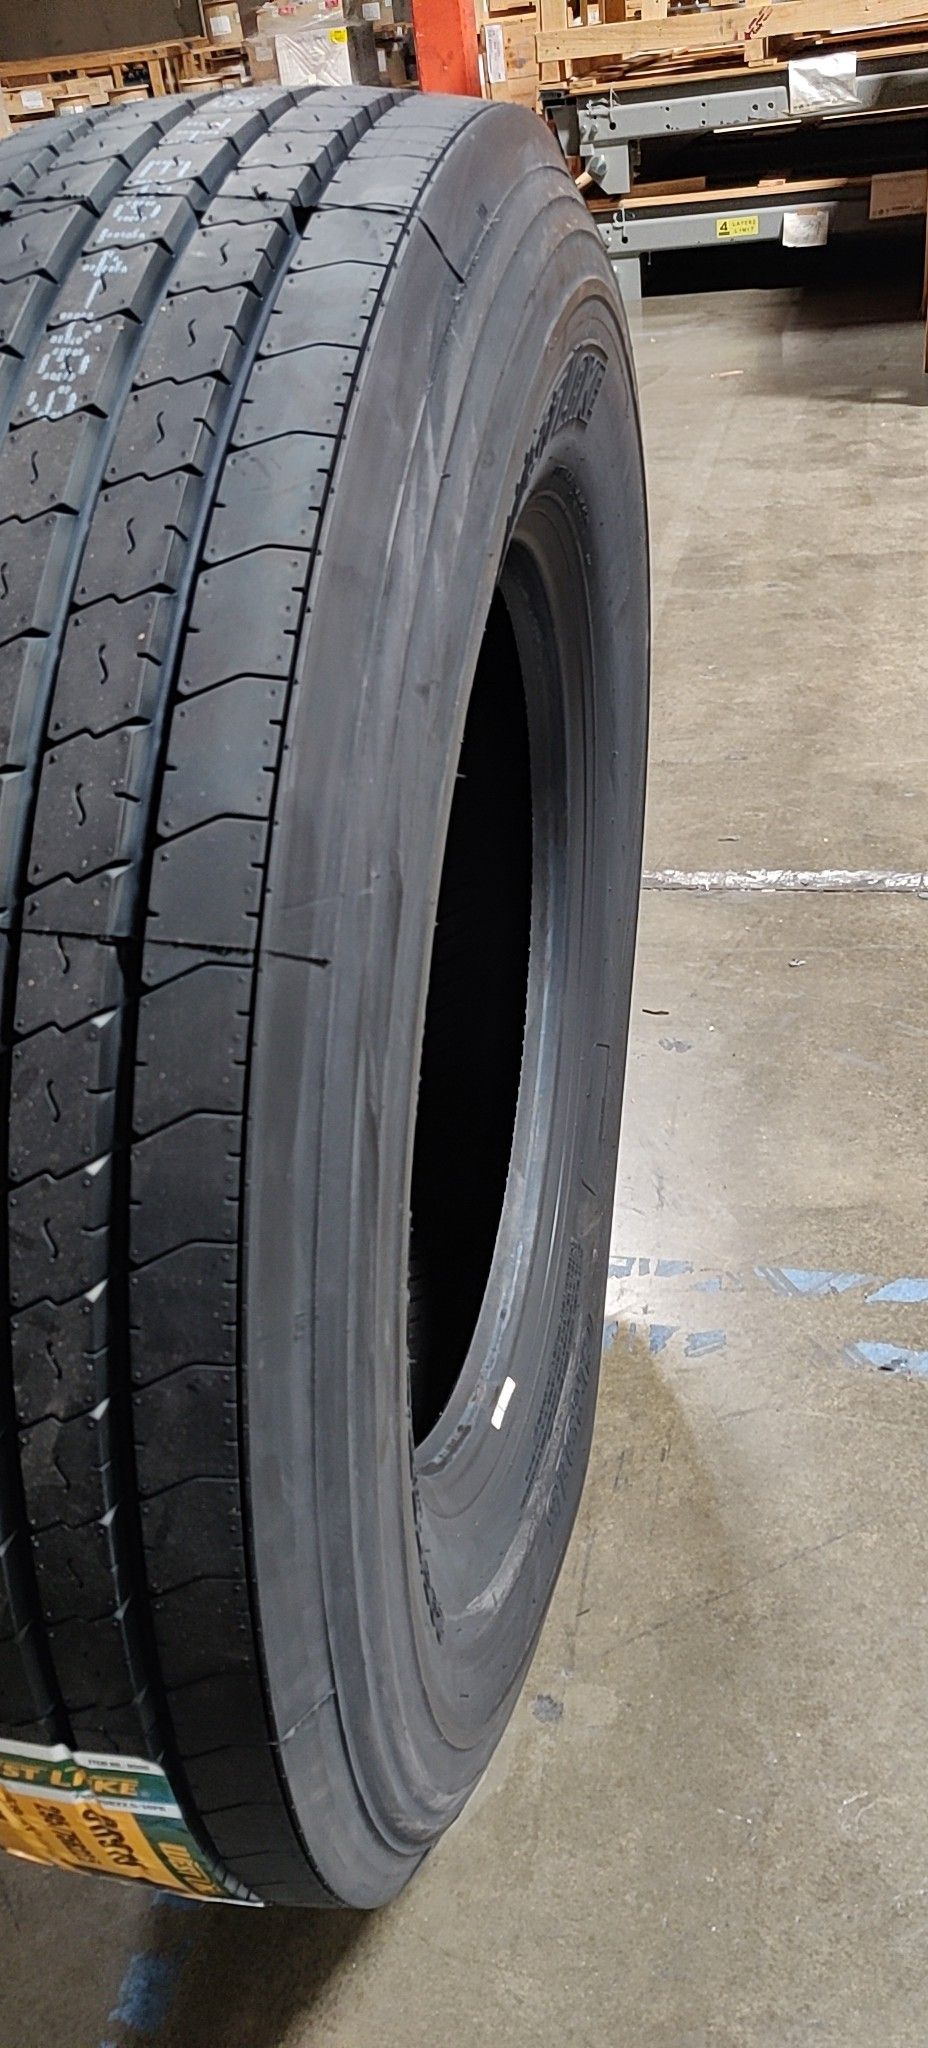 Commercial truck tire Westlake trailer 295/75r22.5 tires installation included